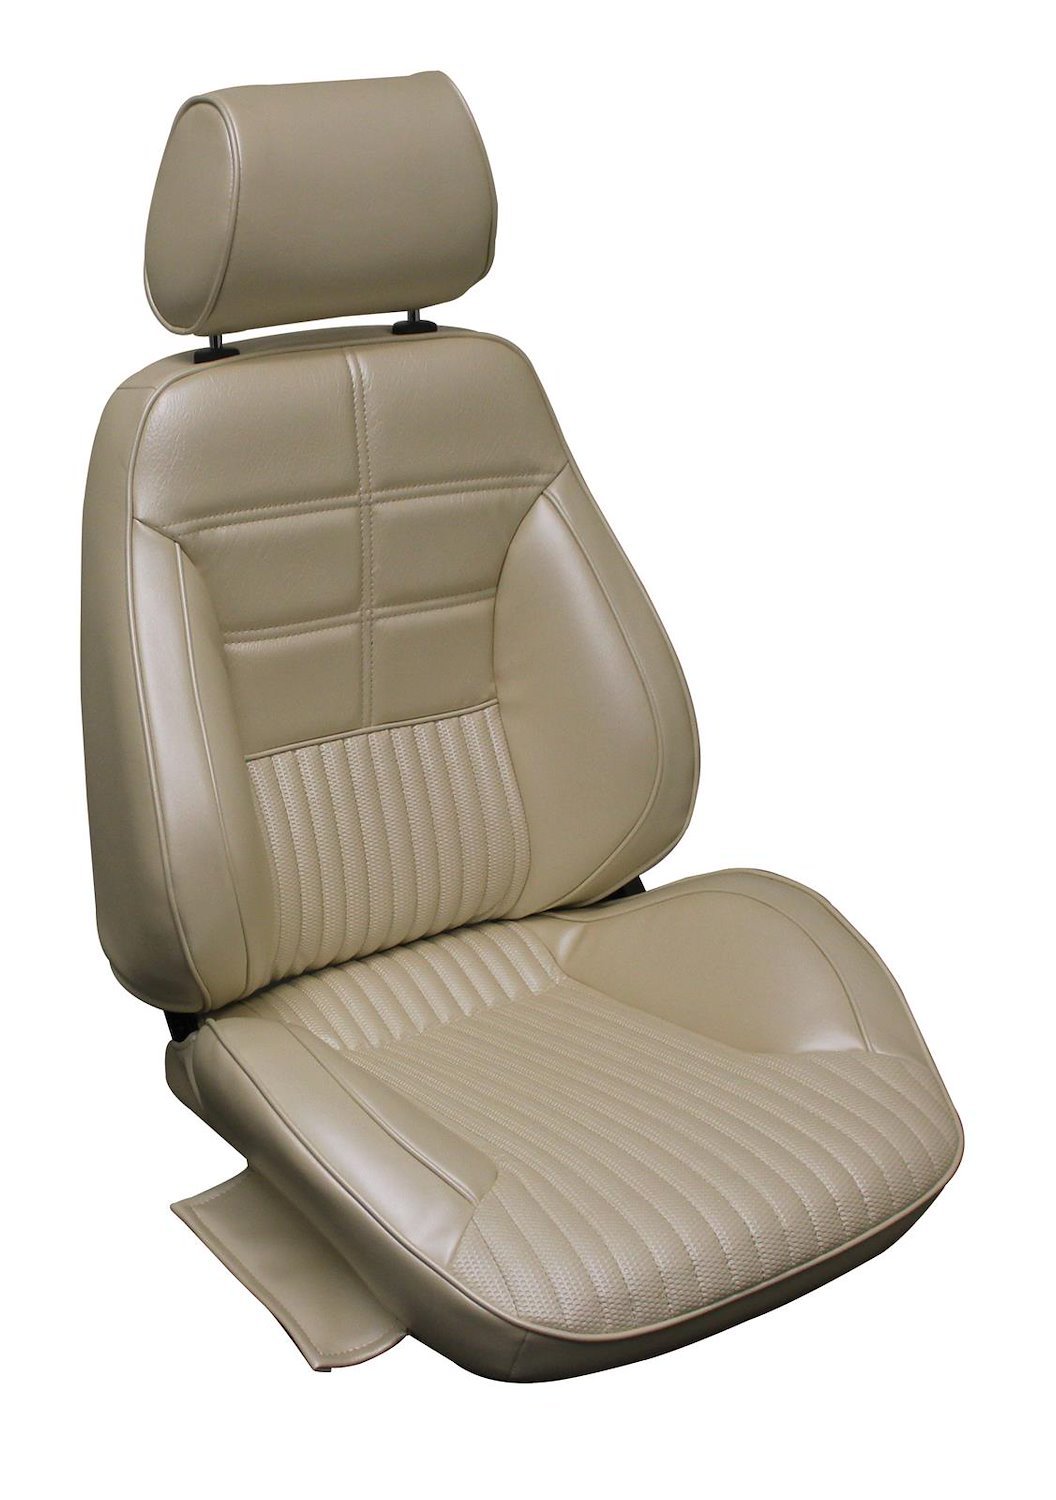 1970 Ford Mustang Deluxe and Grande Interior Ivy Touring II Preassembled Reclining Front Bucket Seats